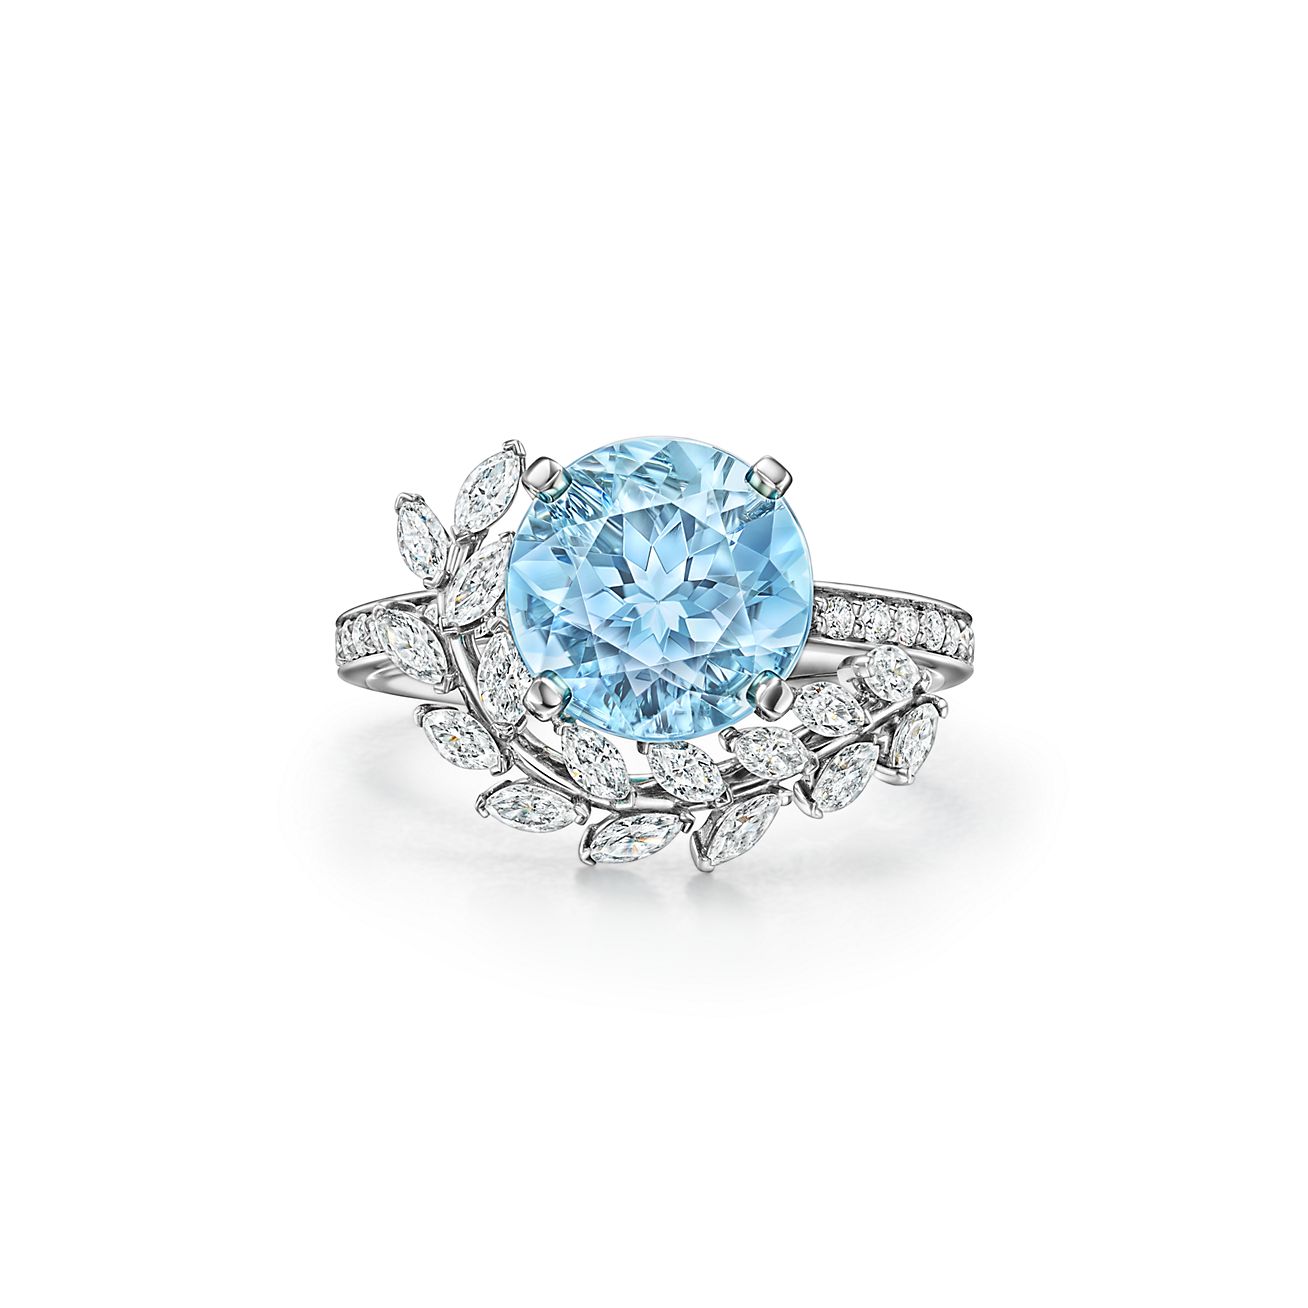 Tiffany Victoria® Vine Ring in Platinum with an Aquamarine and